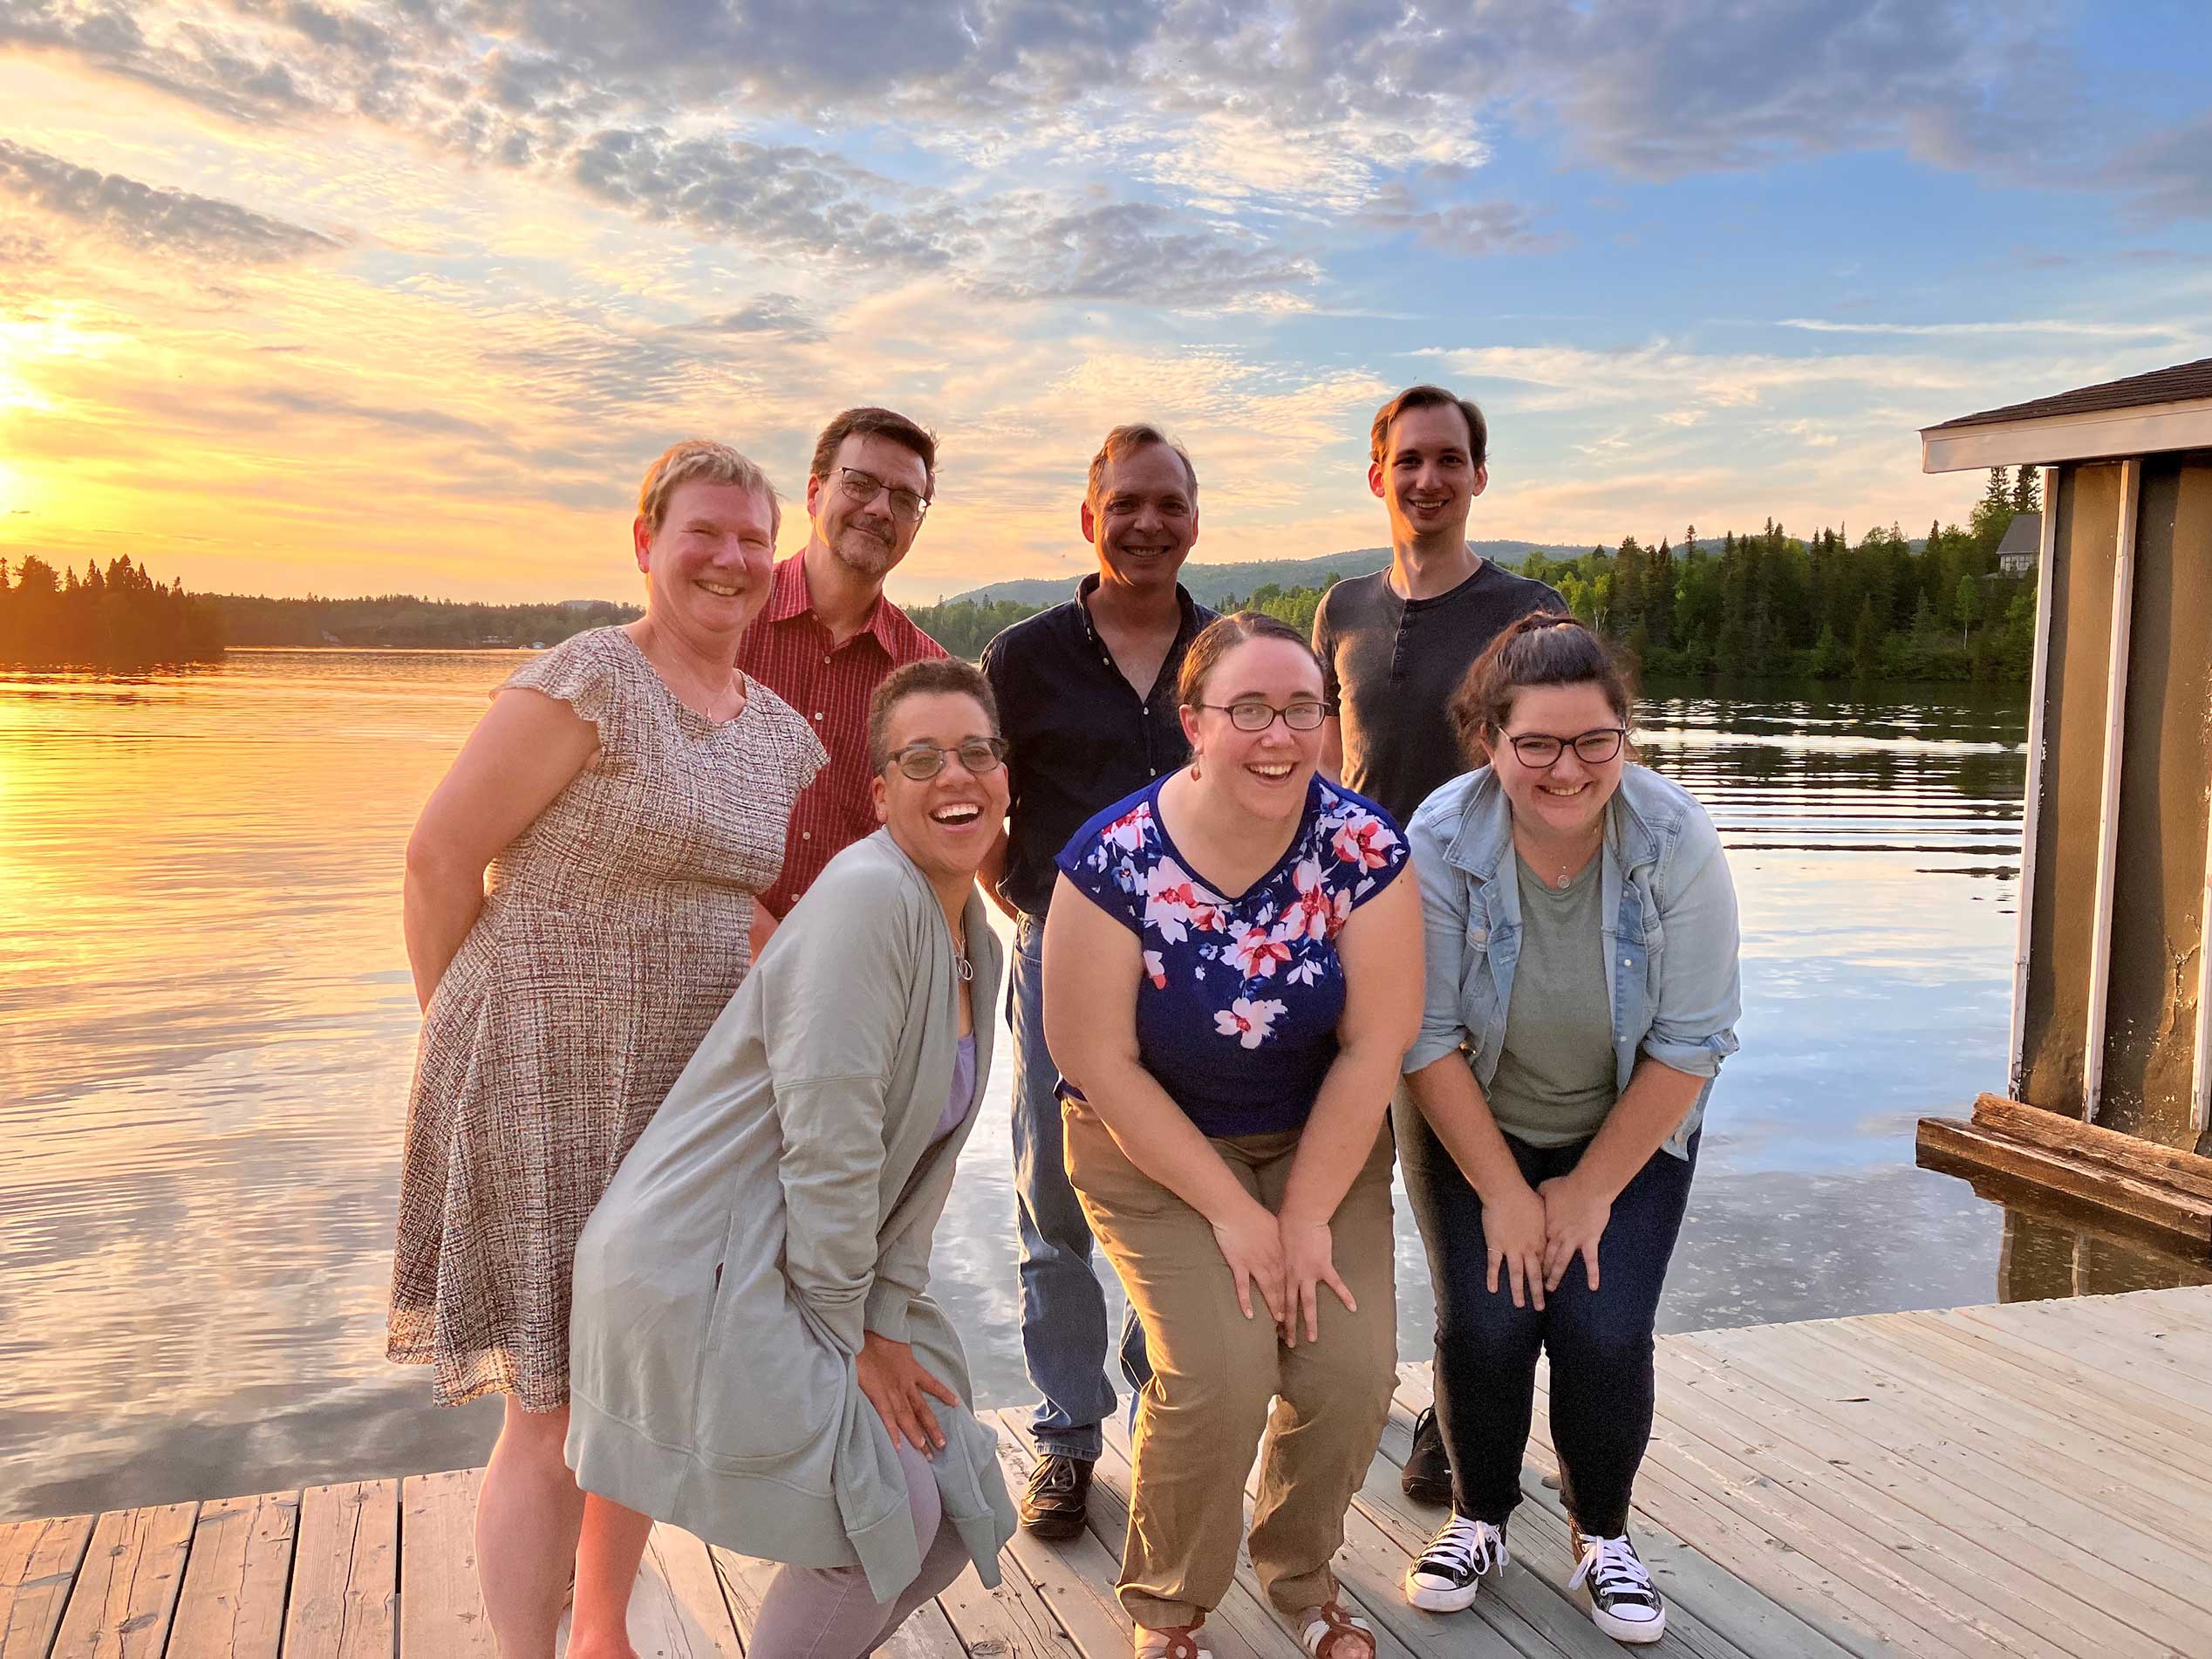 Seven alumni pose on the dock of a lake, with the setting sun in the background.